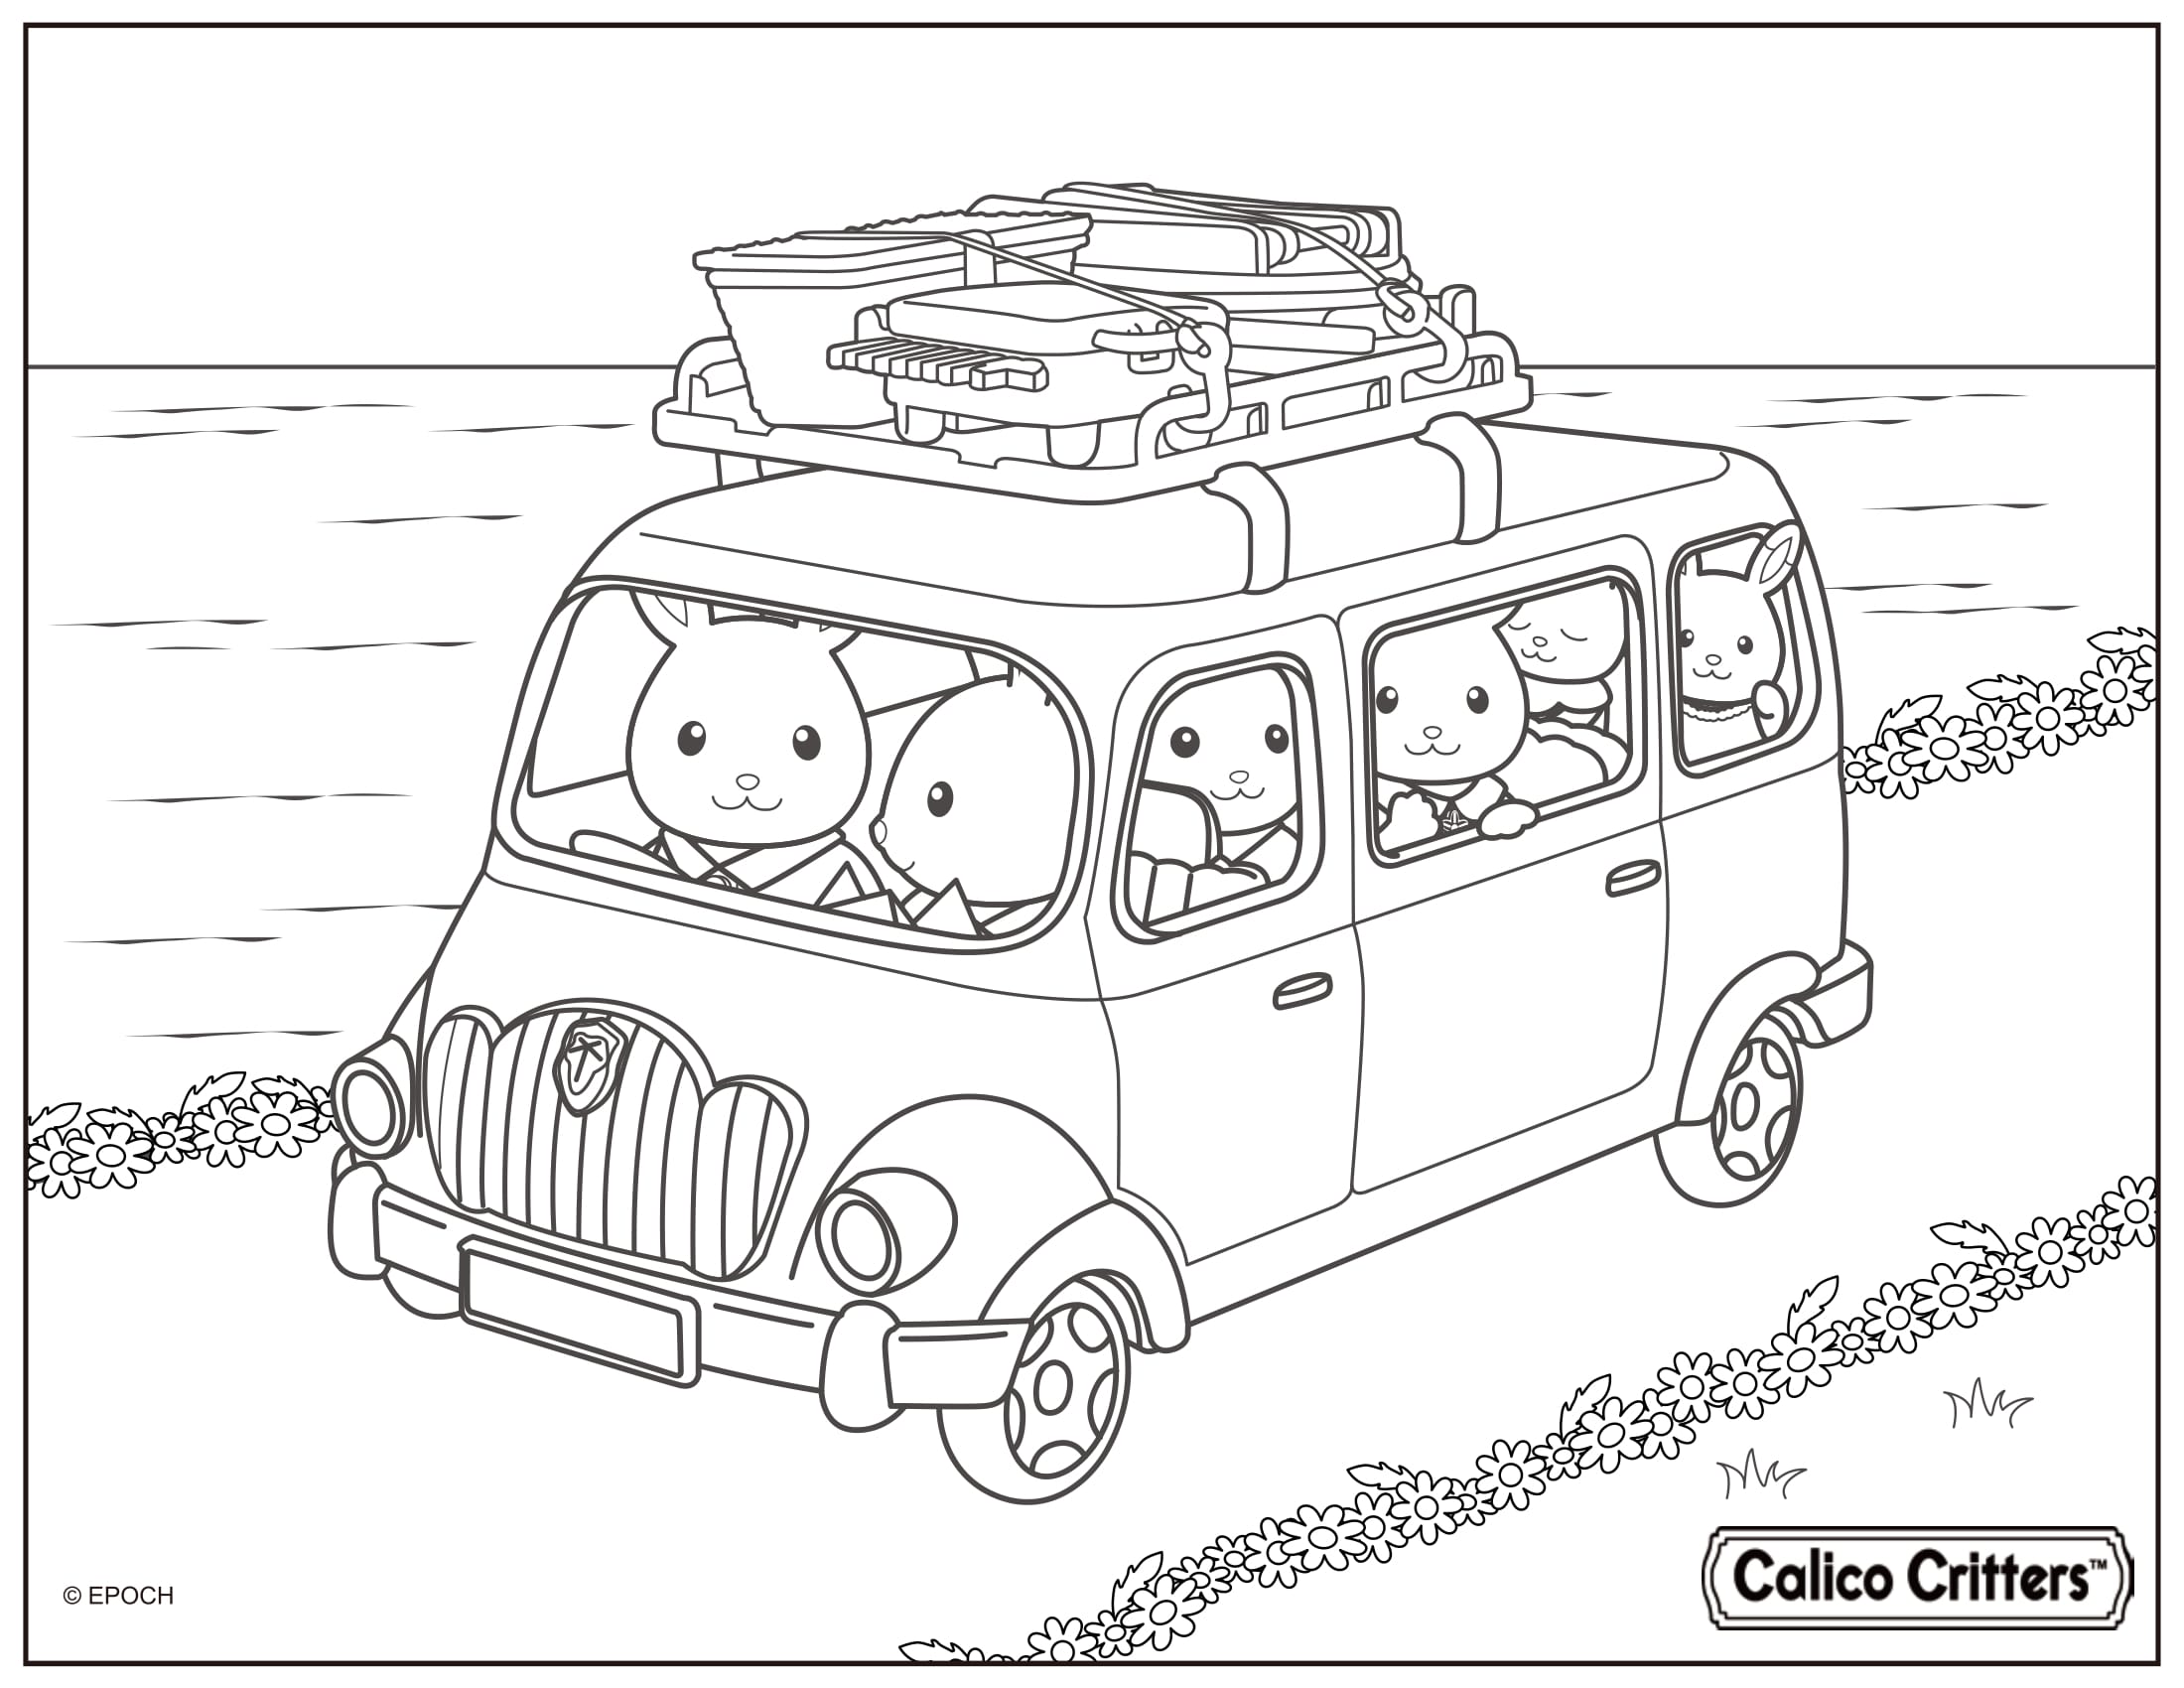 Calico Critters All The Family Travel